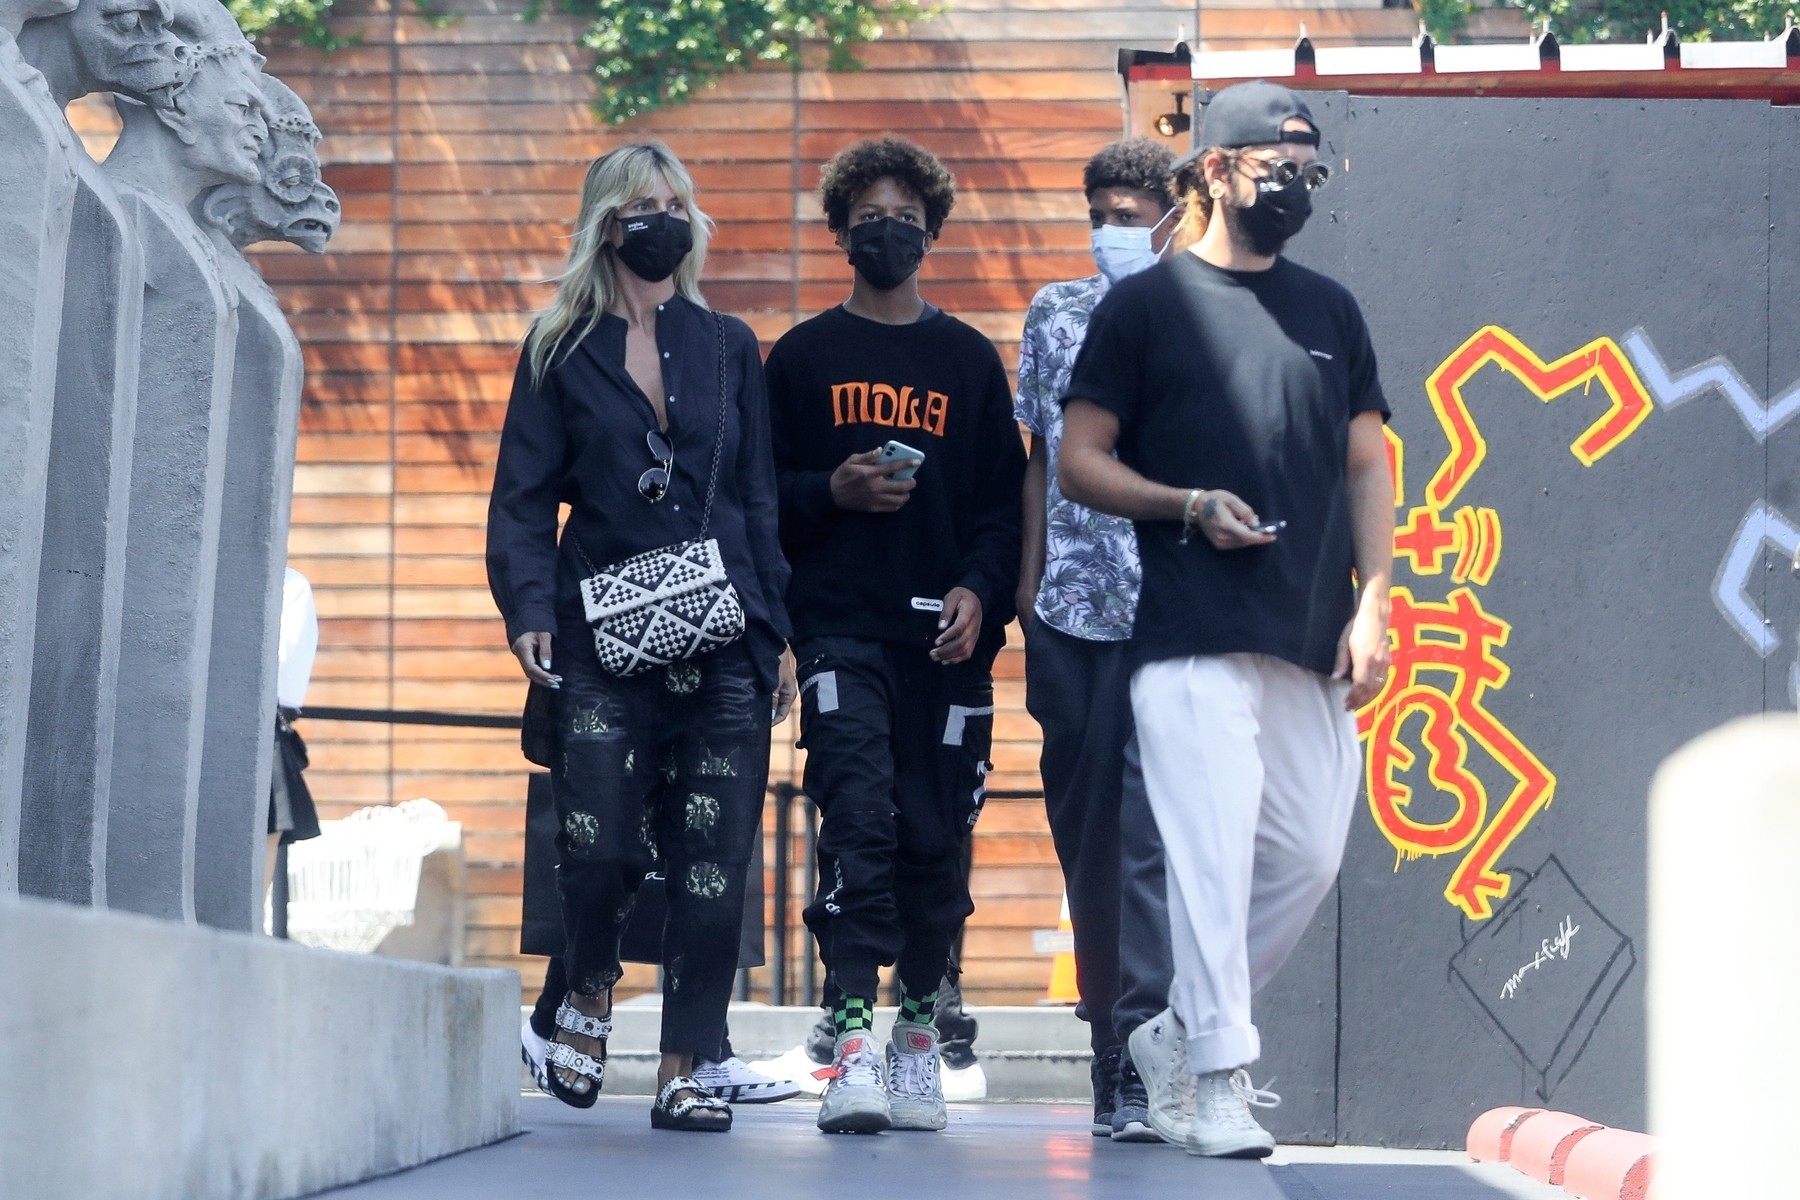 West Hollywood, CA  - *EXCLUSIVE*  - Heidi Klum was spotted shopping at Maxfield with her two boys Johan and Henry, along with boyfriend Tom Kaulitz, at Maxfield West Hollywood.

BACKGRID USA 22 JULY 2020,Image: 546162880, License: Rights-managed, Restrictions: , Model Release: no, Credit line: BACKGRID / Backgrid USA / Profimedia